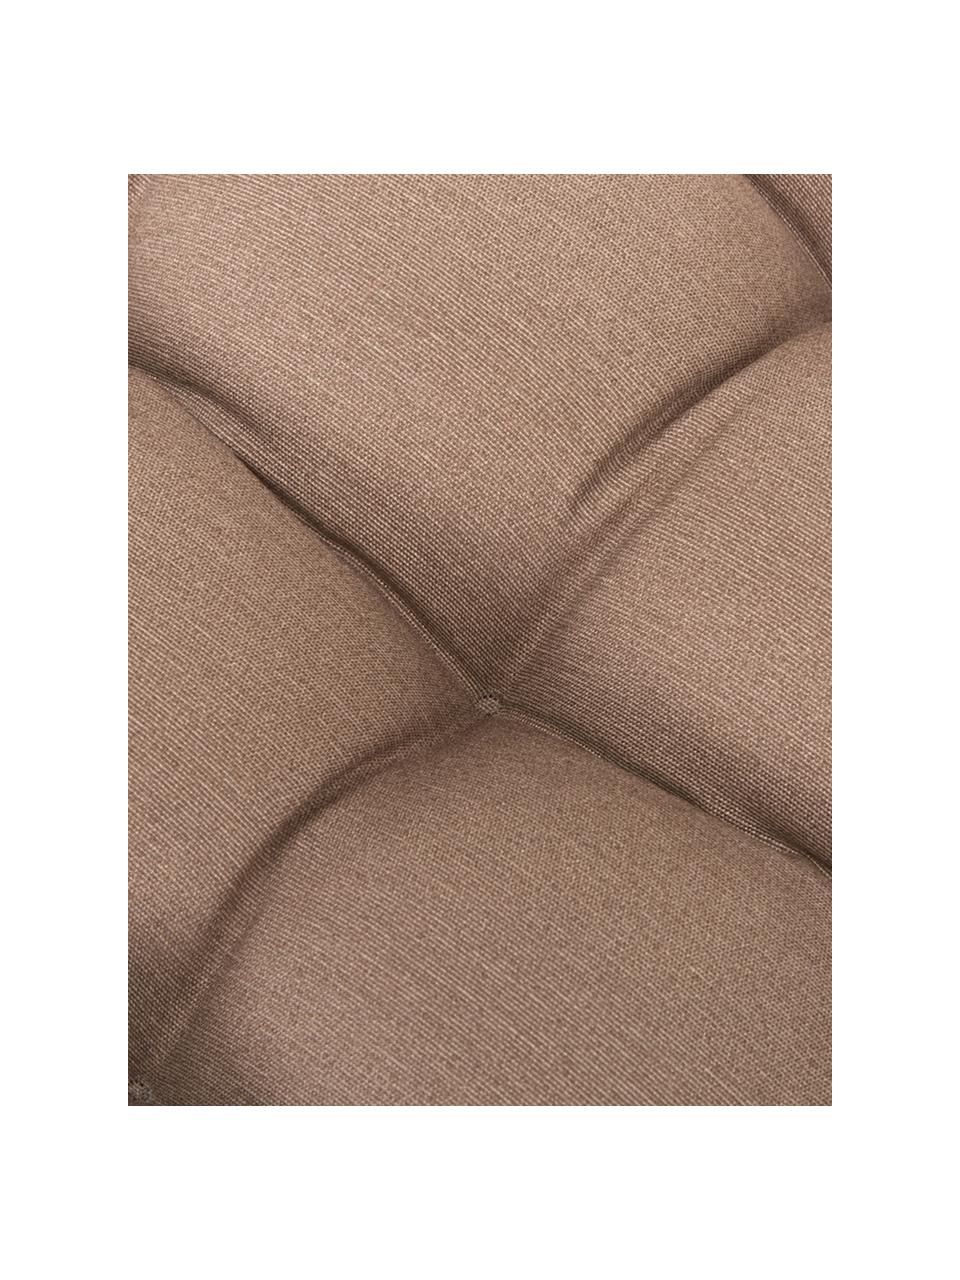 Effen stoelkussen Panama in taupe, Taupe, B 45 x L 45 cm